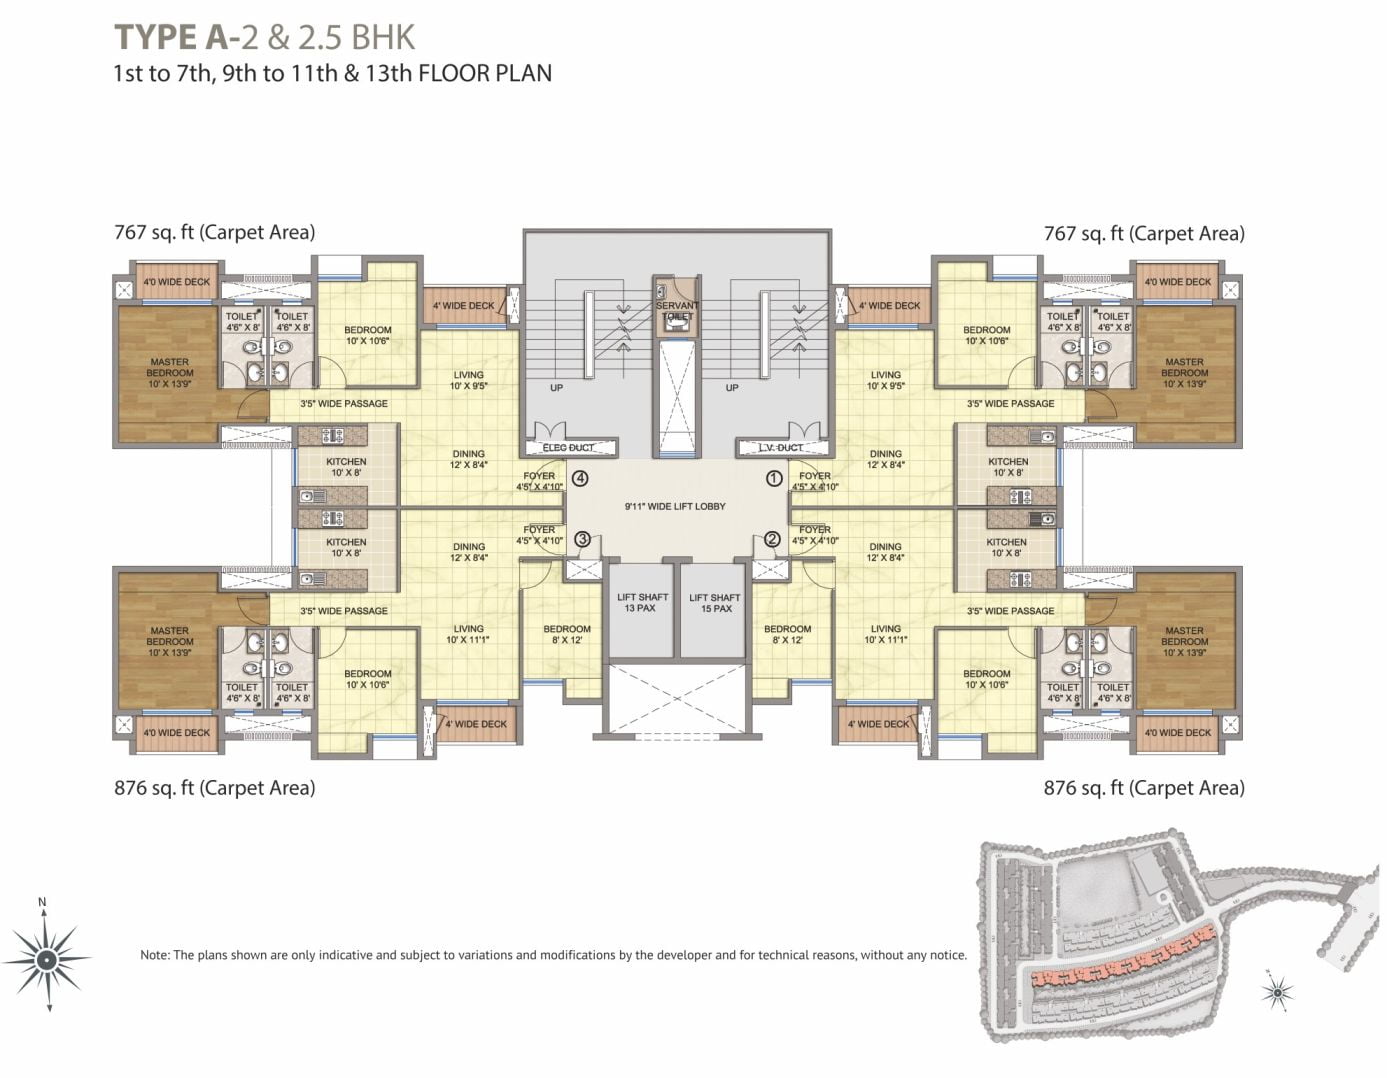 Type A 2 & 2.5 BHK 1-7th